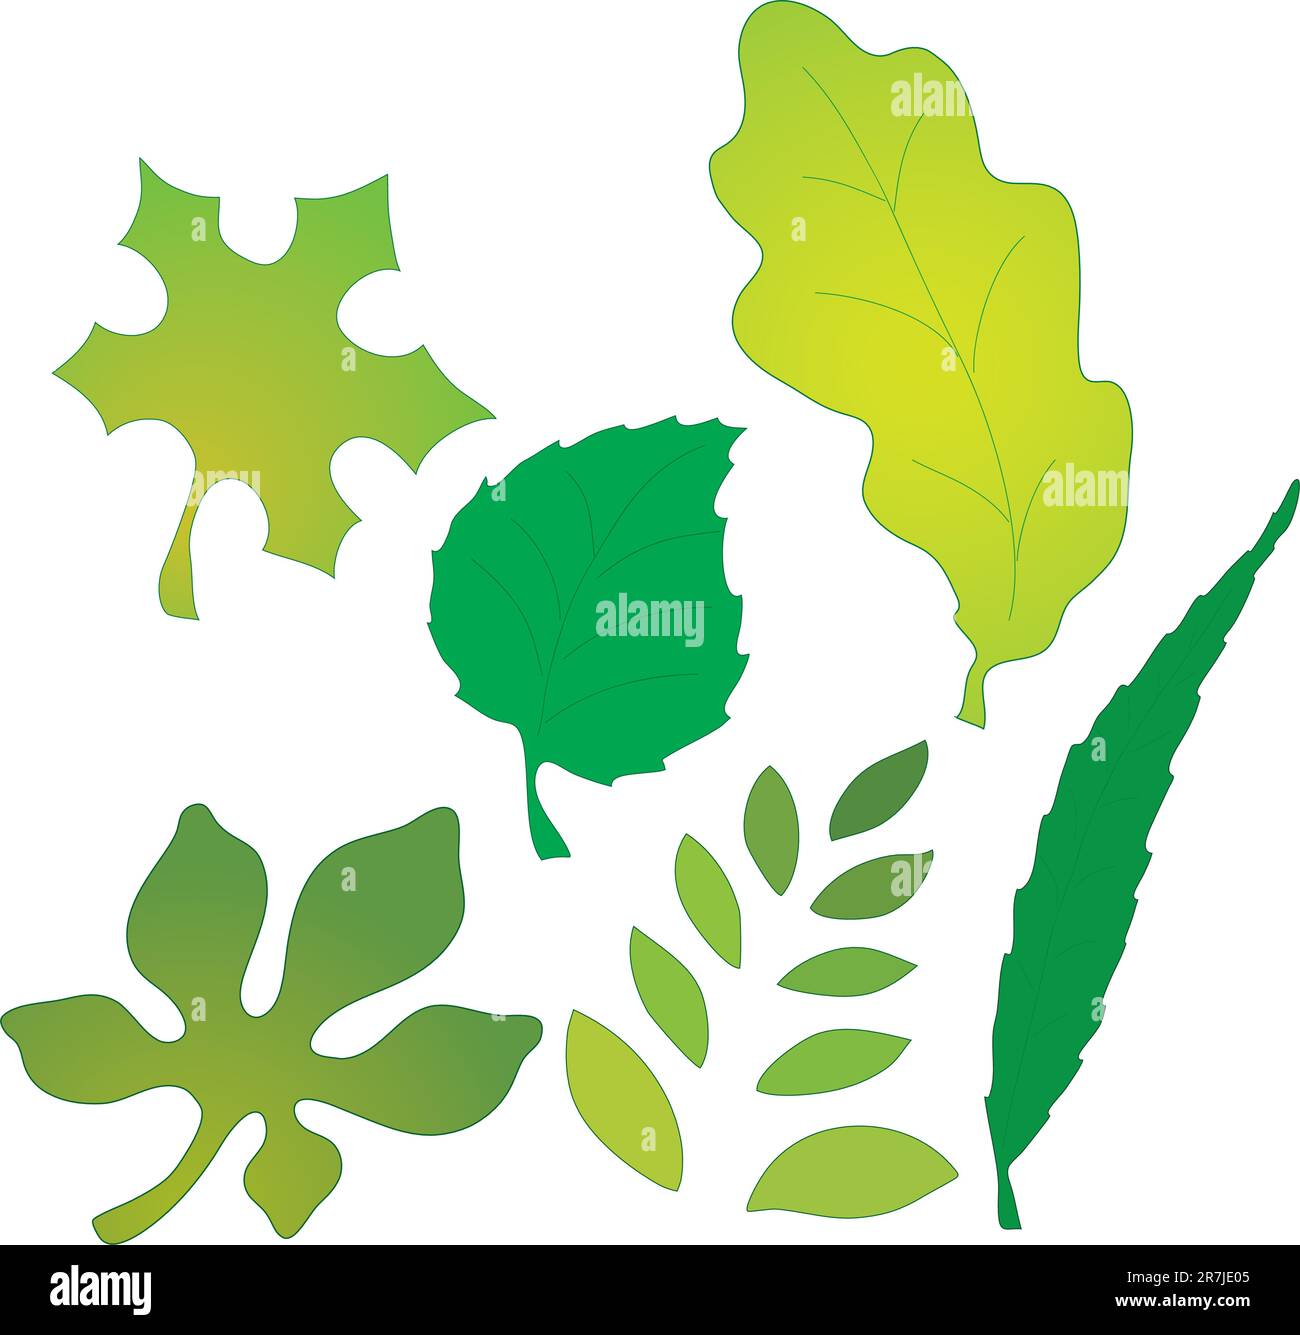 Vector illustration of different types of leaves on a white background Stock Vector